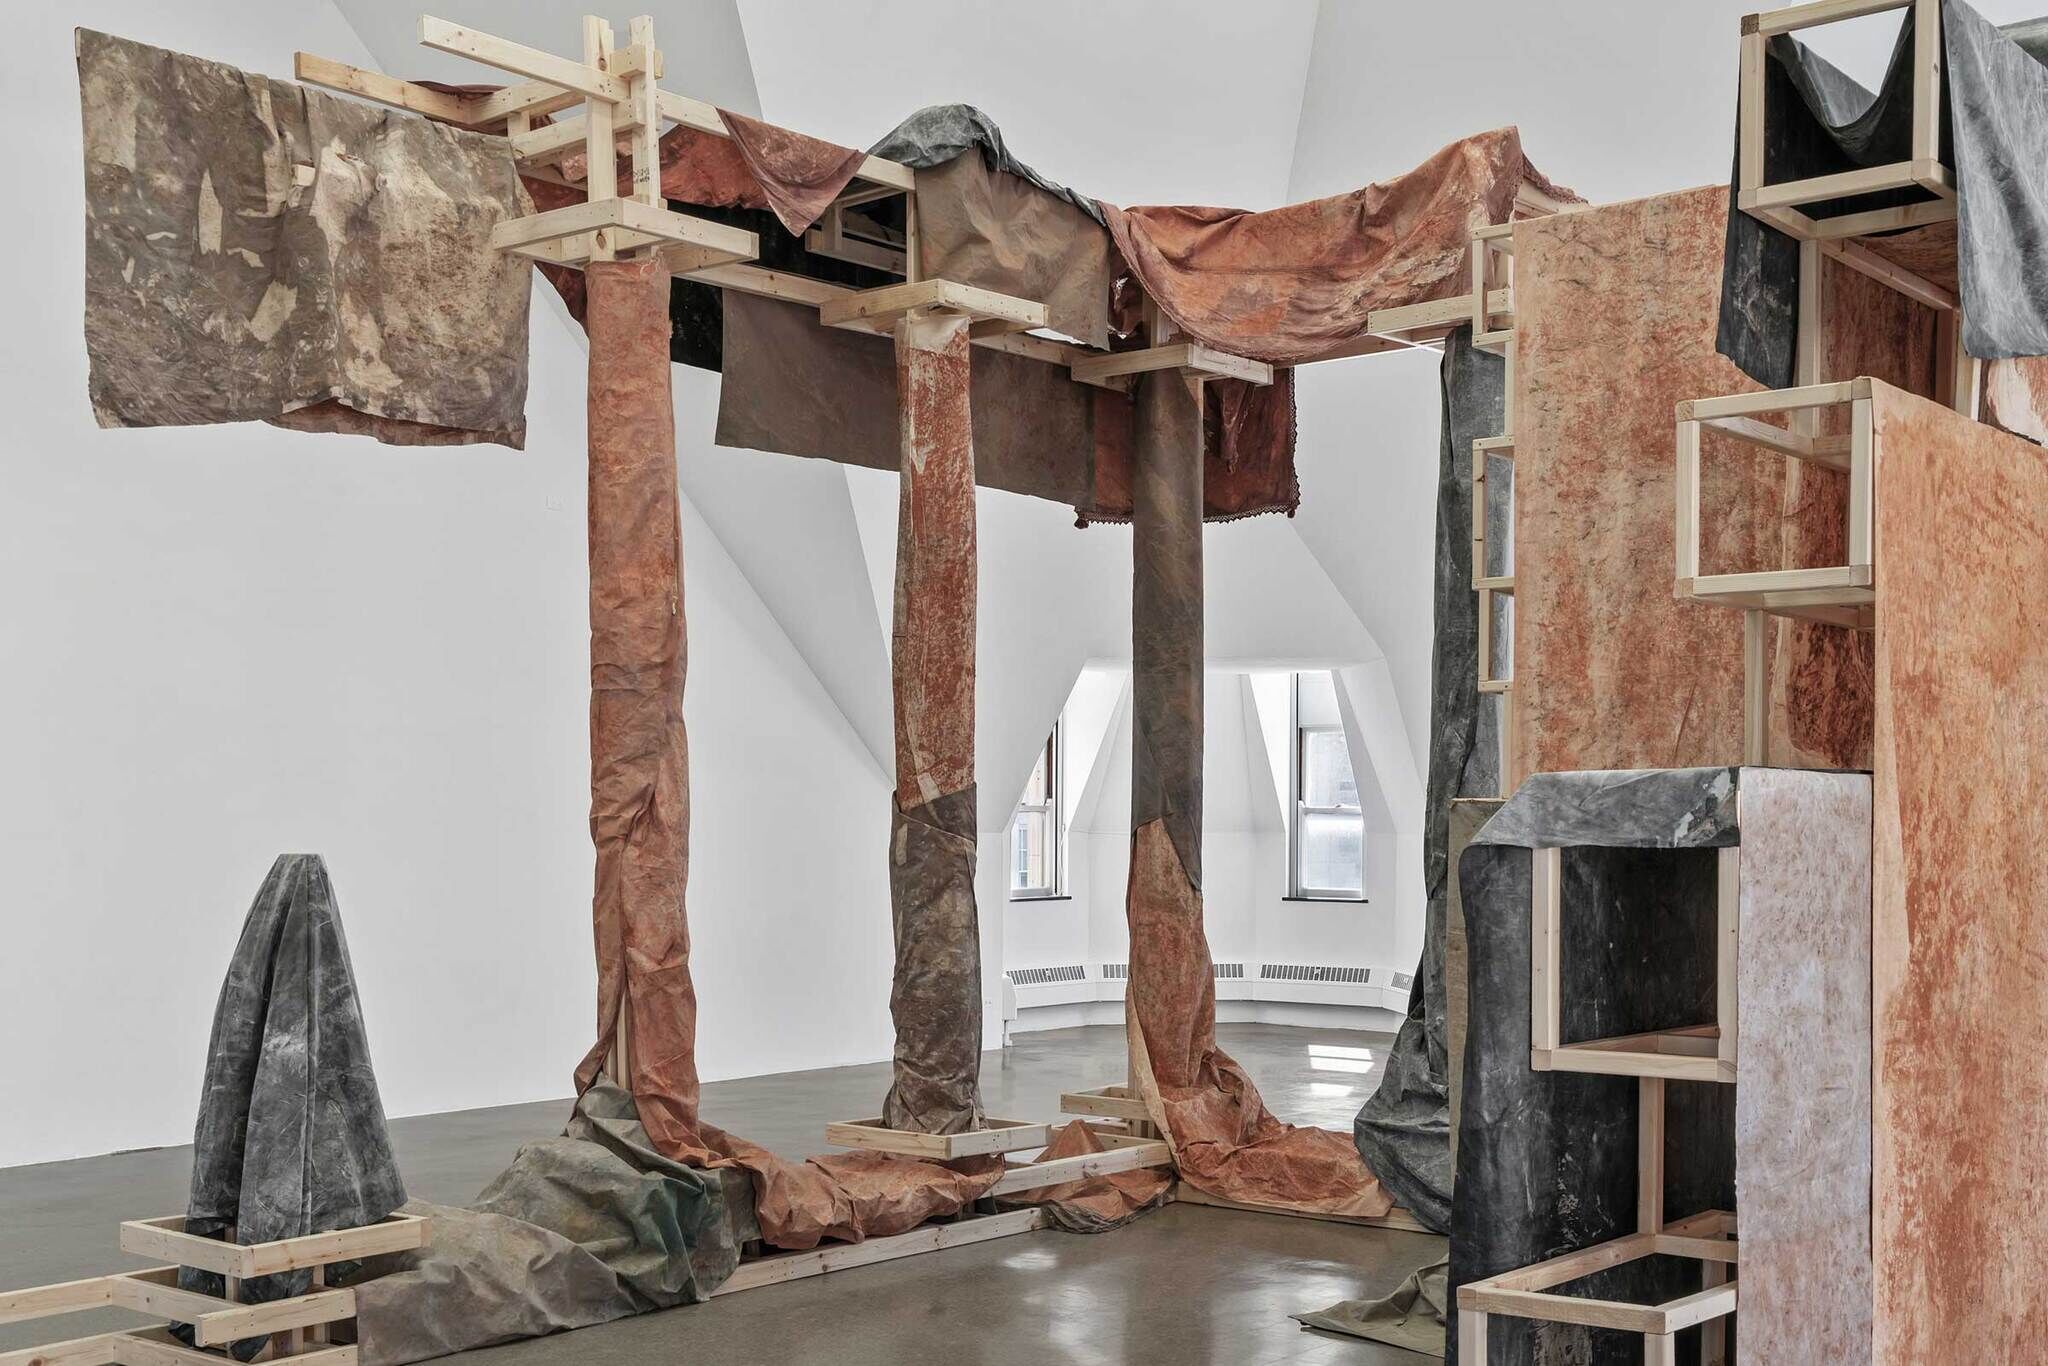 Modern art installation with wooden structures and draped fabrics in a white gallery space.